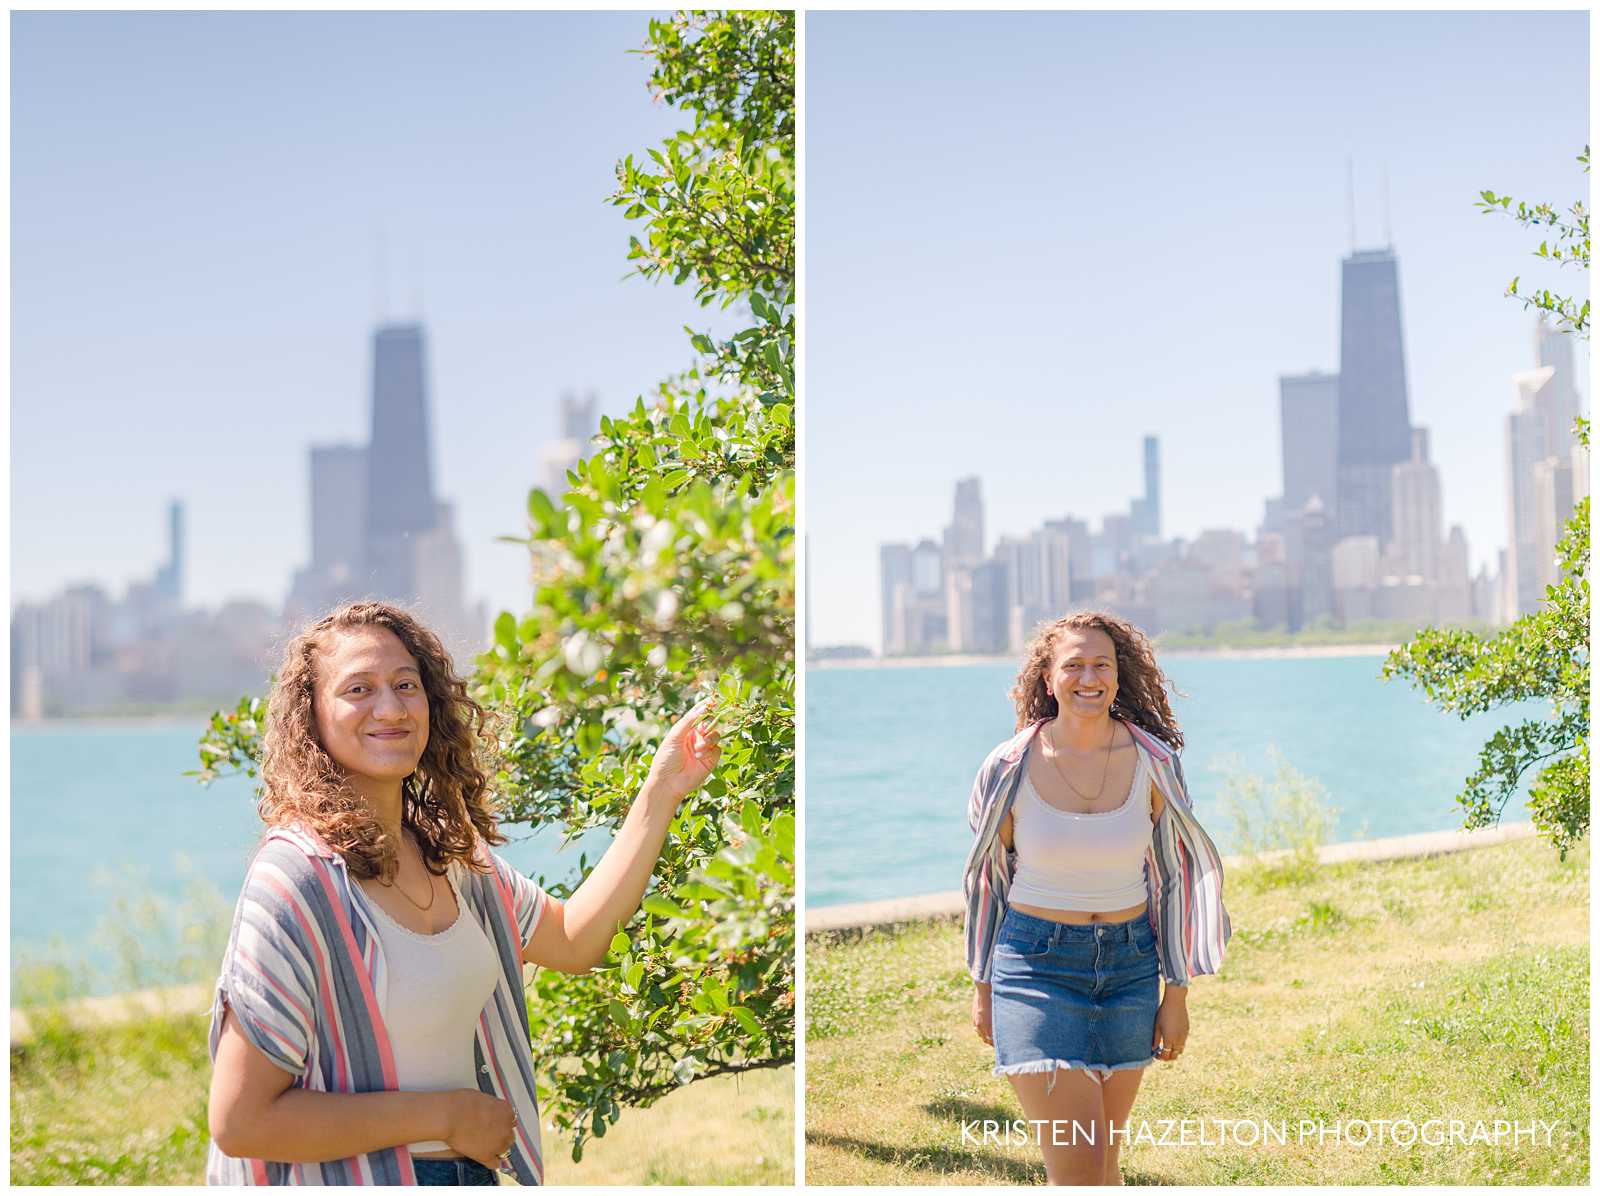 High school senior girl investigating fruits on a Chinese Elm tree in front of the Chicago skyline